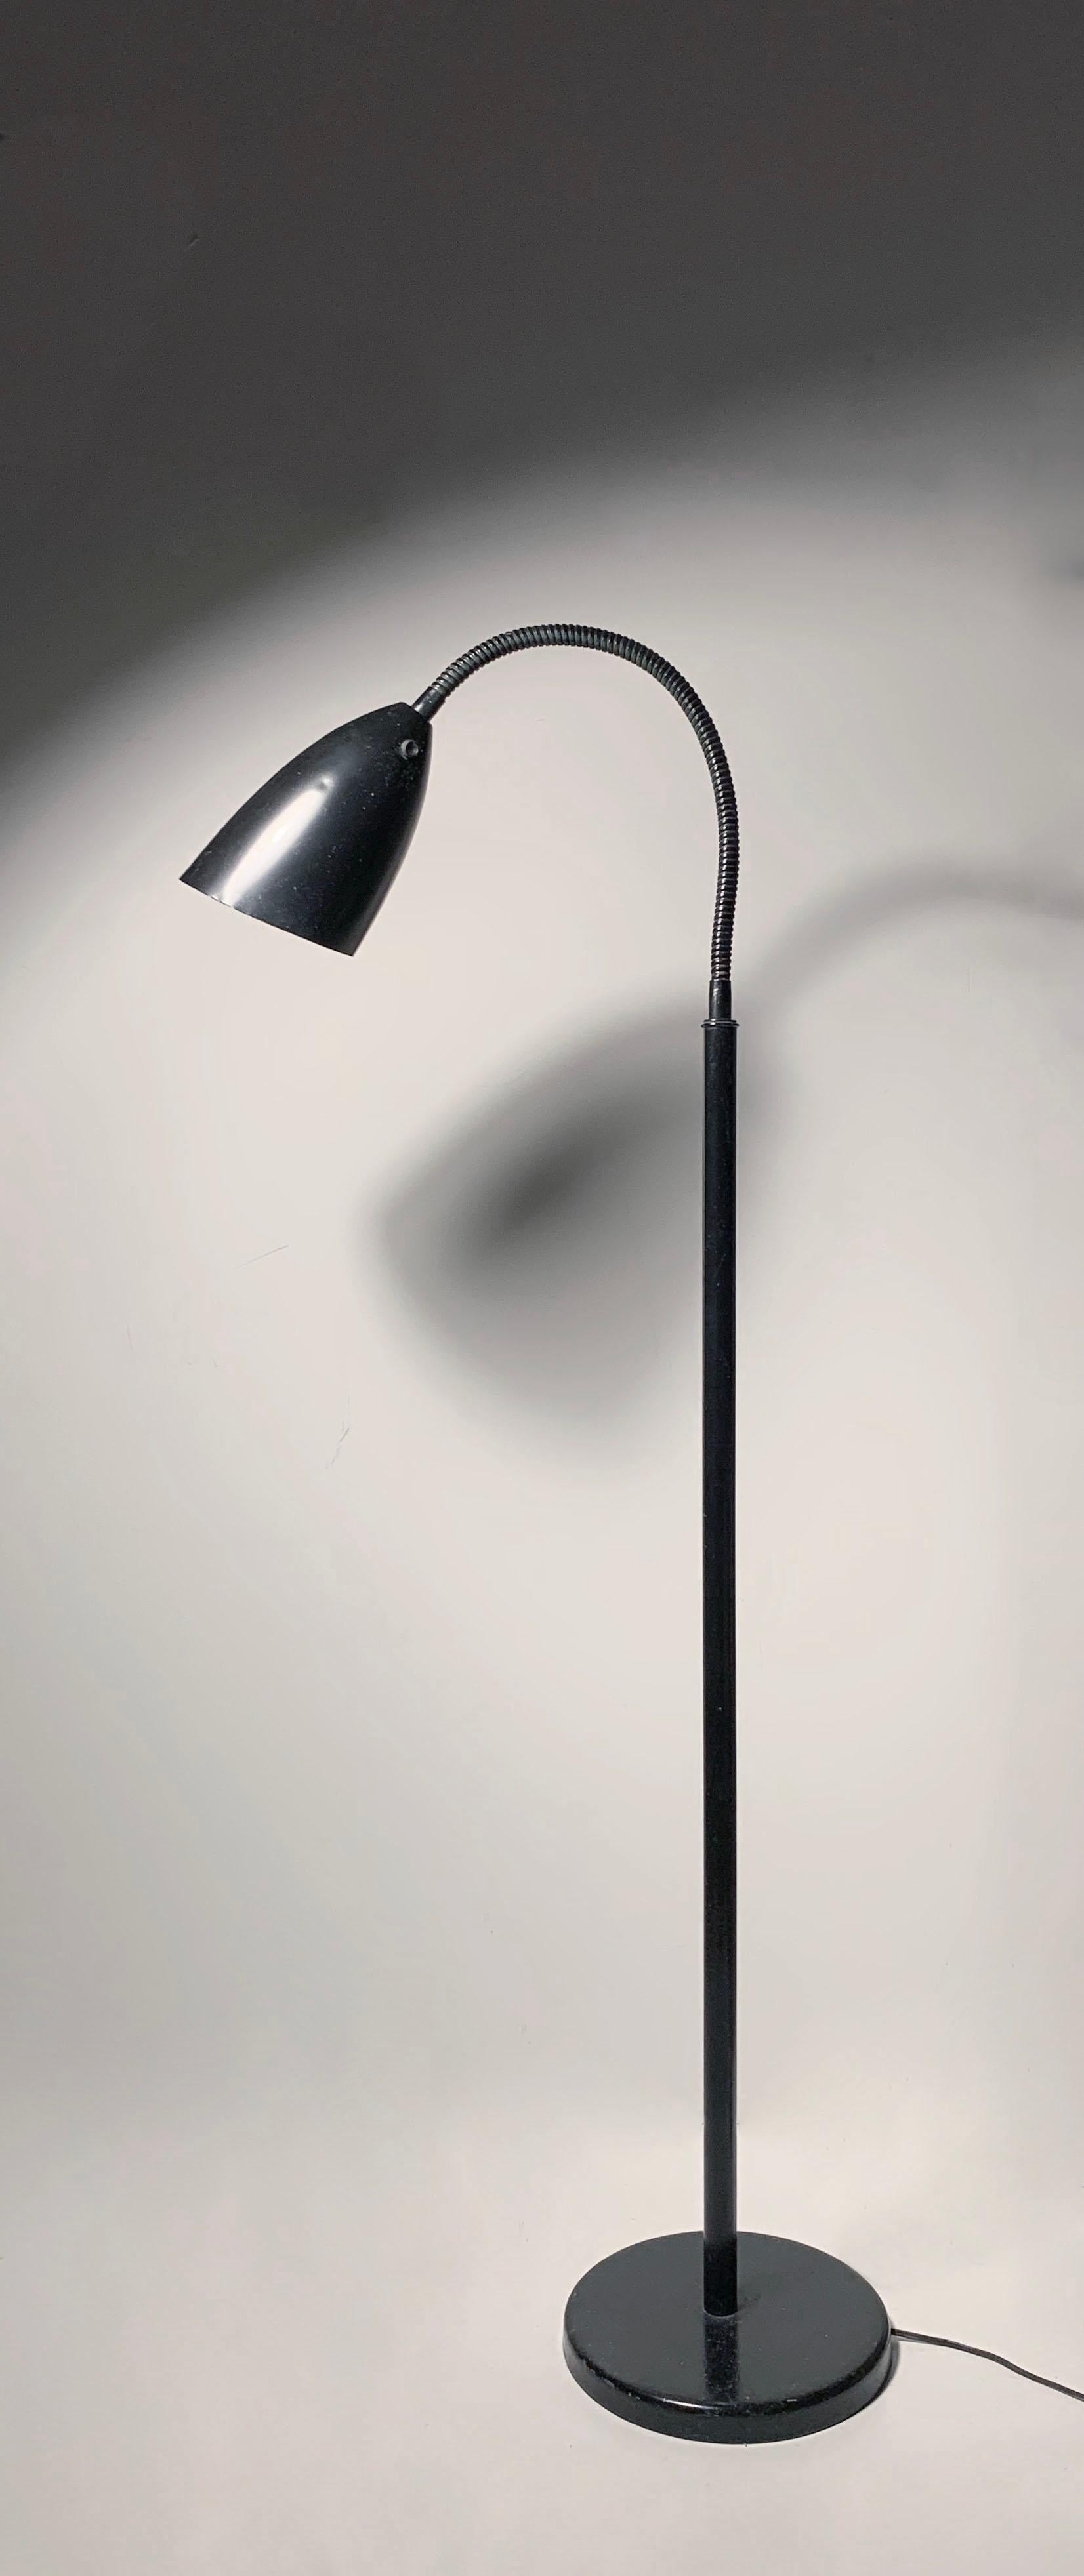 A simple industrial design lamp survivor with a single bullet form shade. Attributed to Kurt Versen.  These are always a bit surreal when perfectly fluid like this one. 

Appears to have been repainted black at one time over the original color.